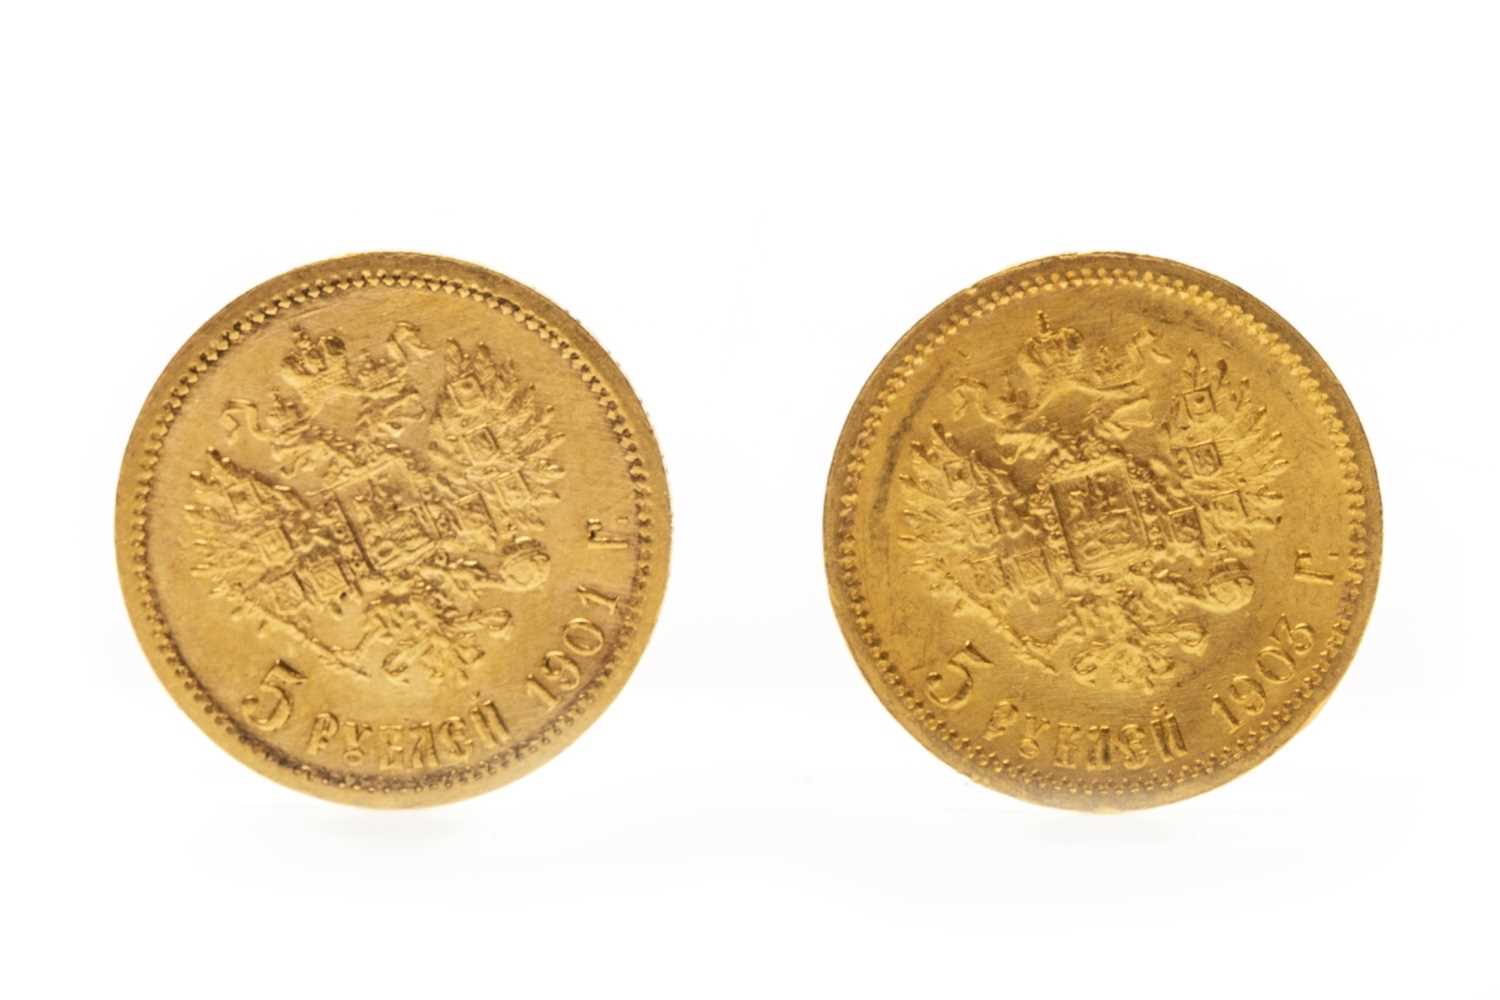 Lot 584 - TWO GOLD 5 RUBLE COINS, 1901 AND 1903